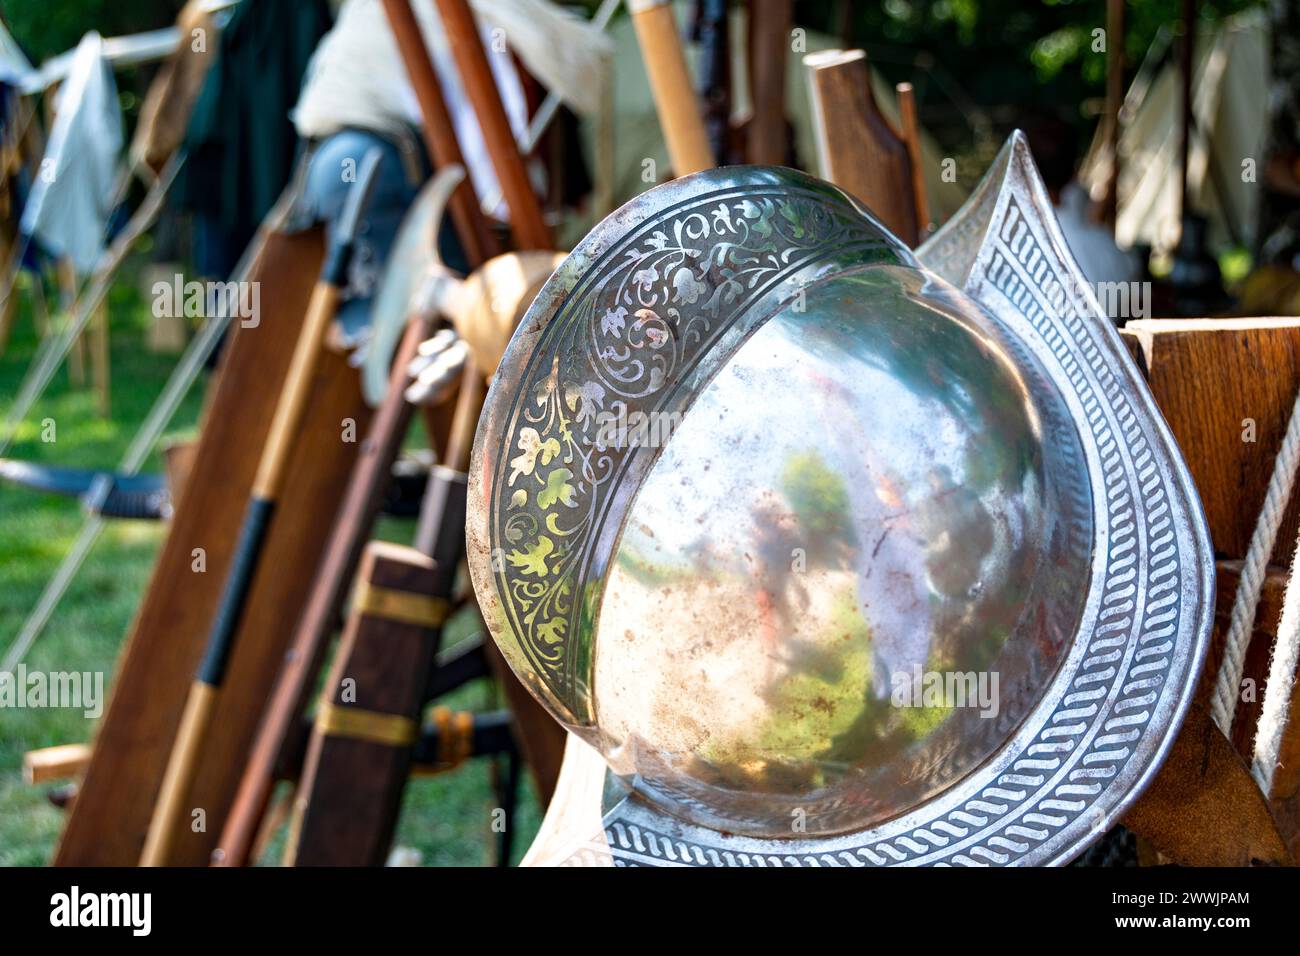 Worn metal Spanish style military helmet with medieval weapons in the background Stock Photo